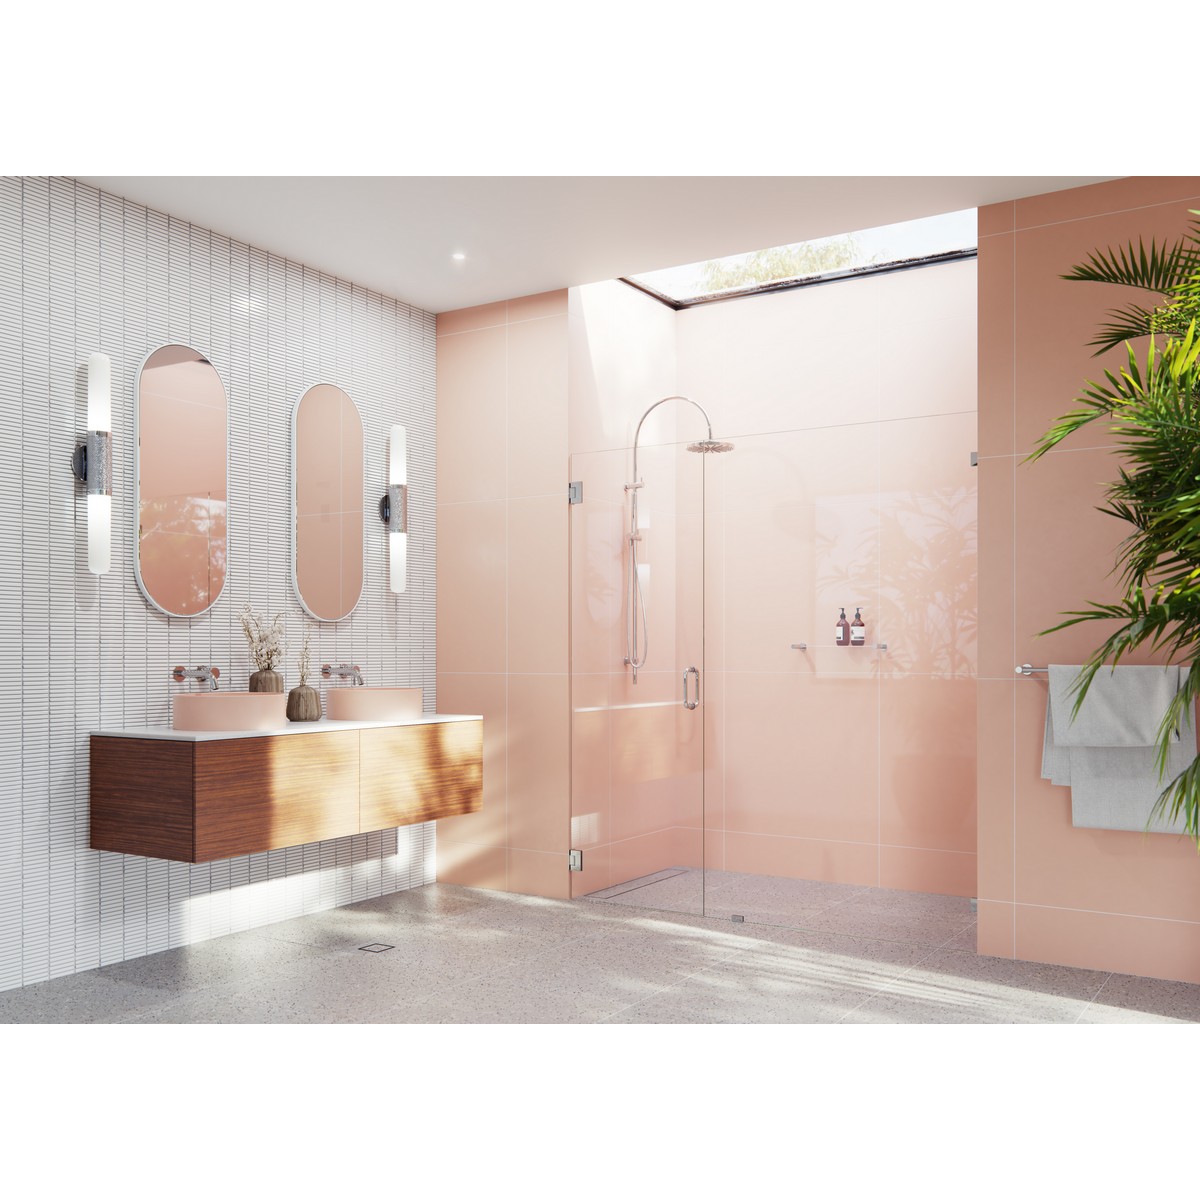 GLASS WAREHOUSE GW-WH-75 ILLUME 75 W X 78 H WALL HINGED FULLY FRAMELESS GLASS SHOWER ENCLOSURE